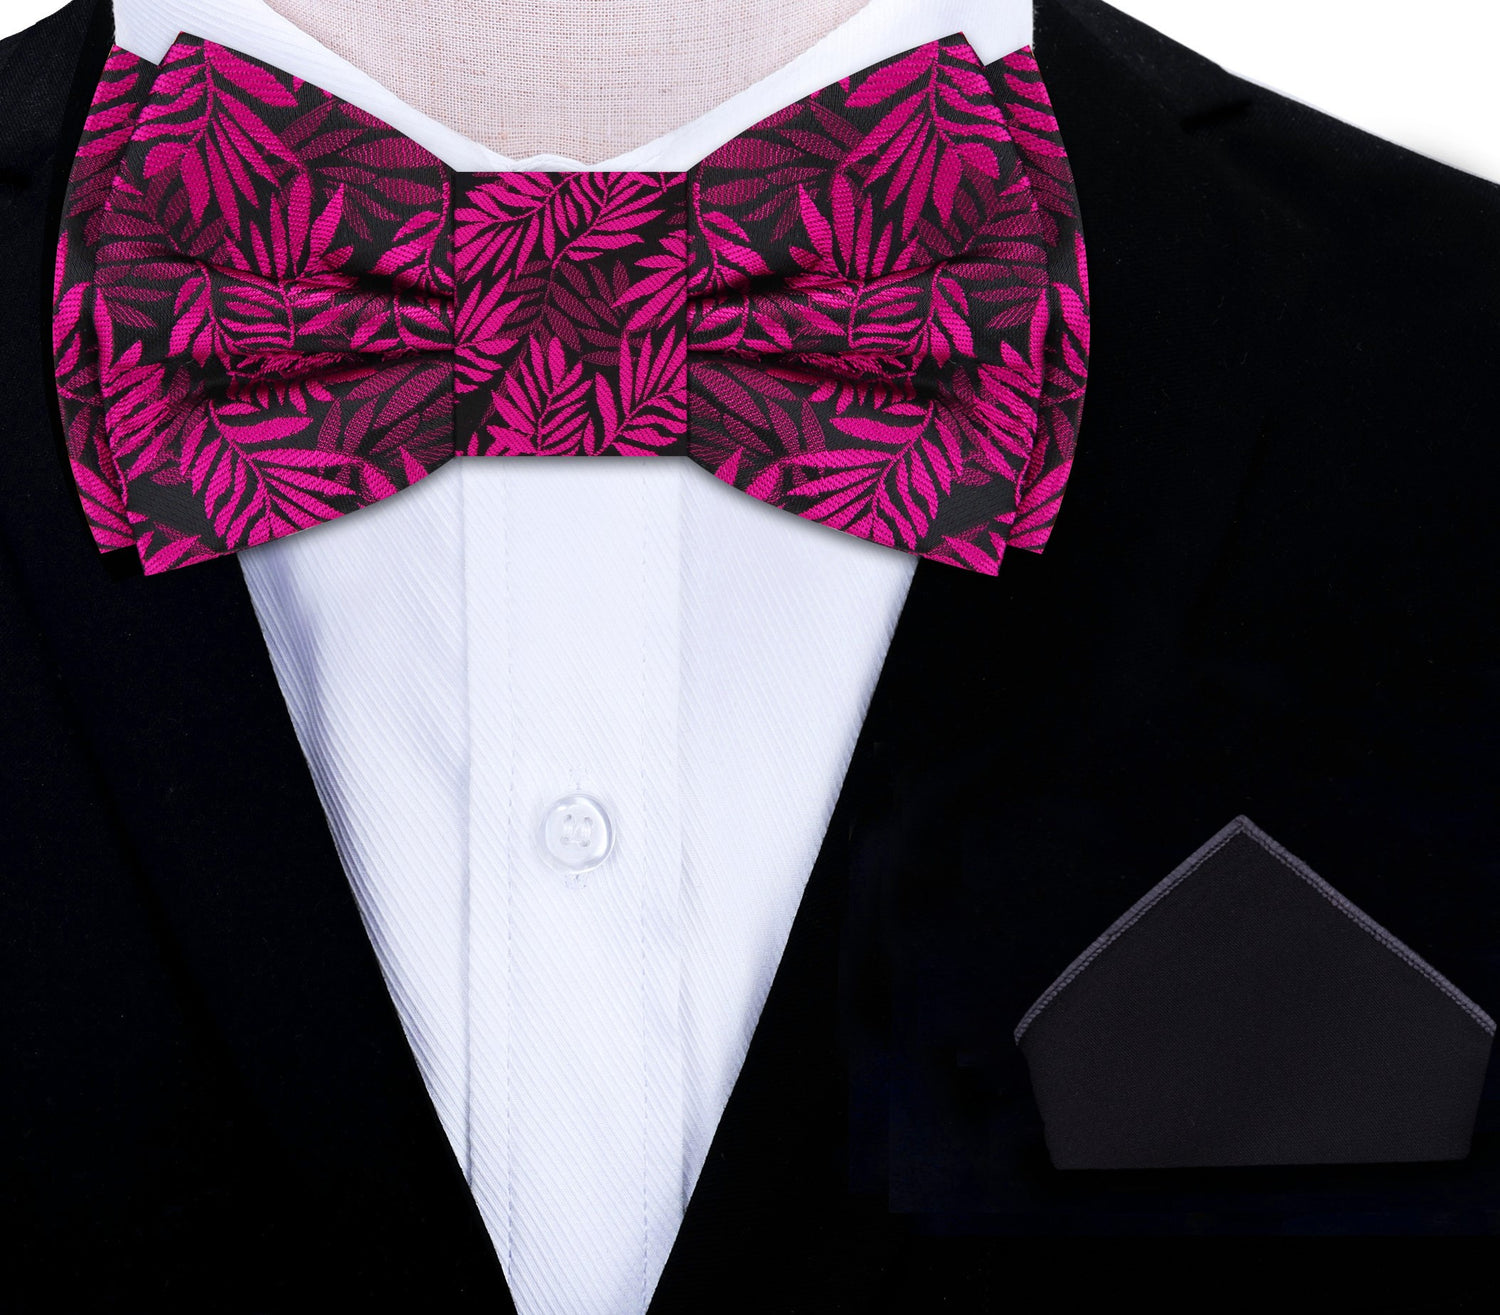 On Suit: Black, Pink Leaves Bow Tie and Black Square